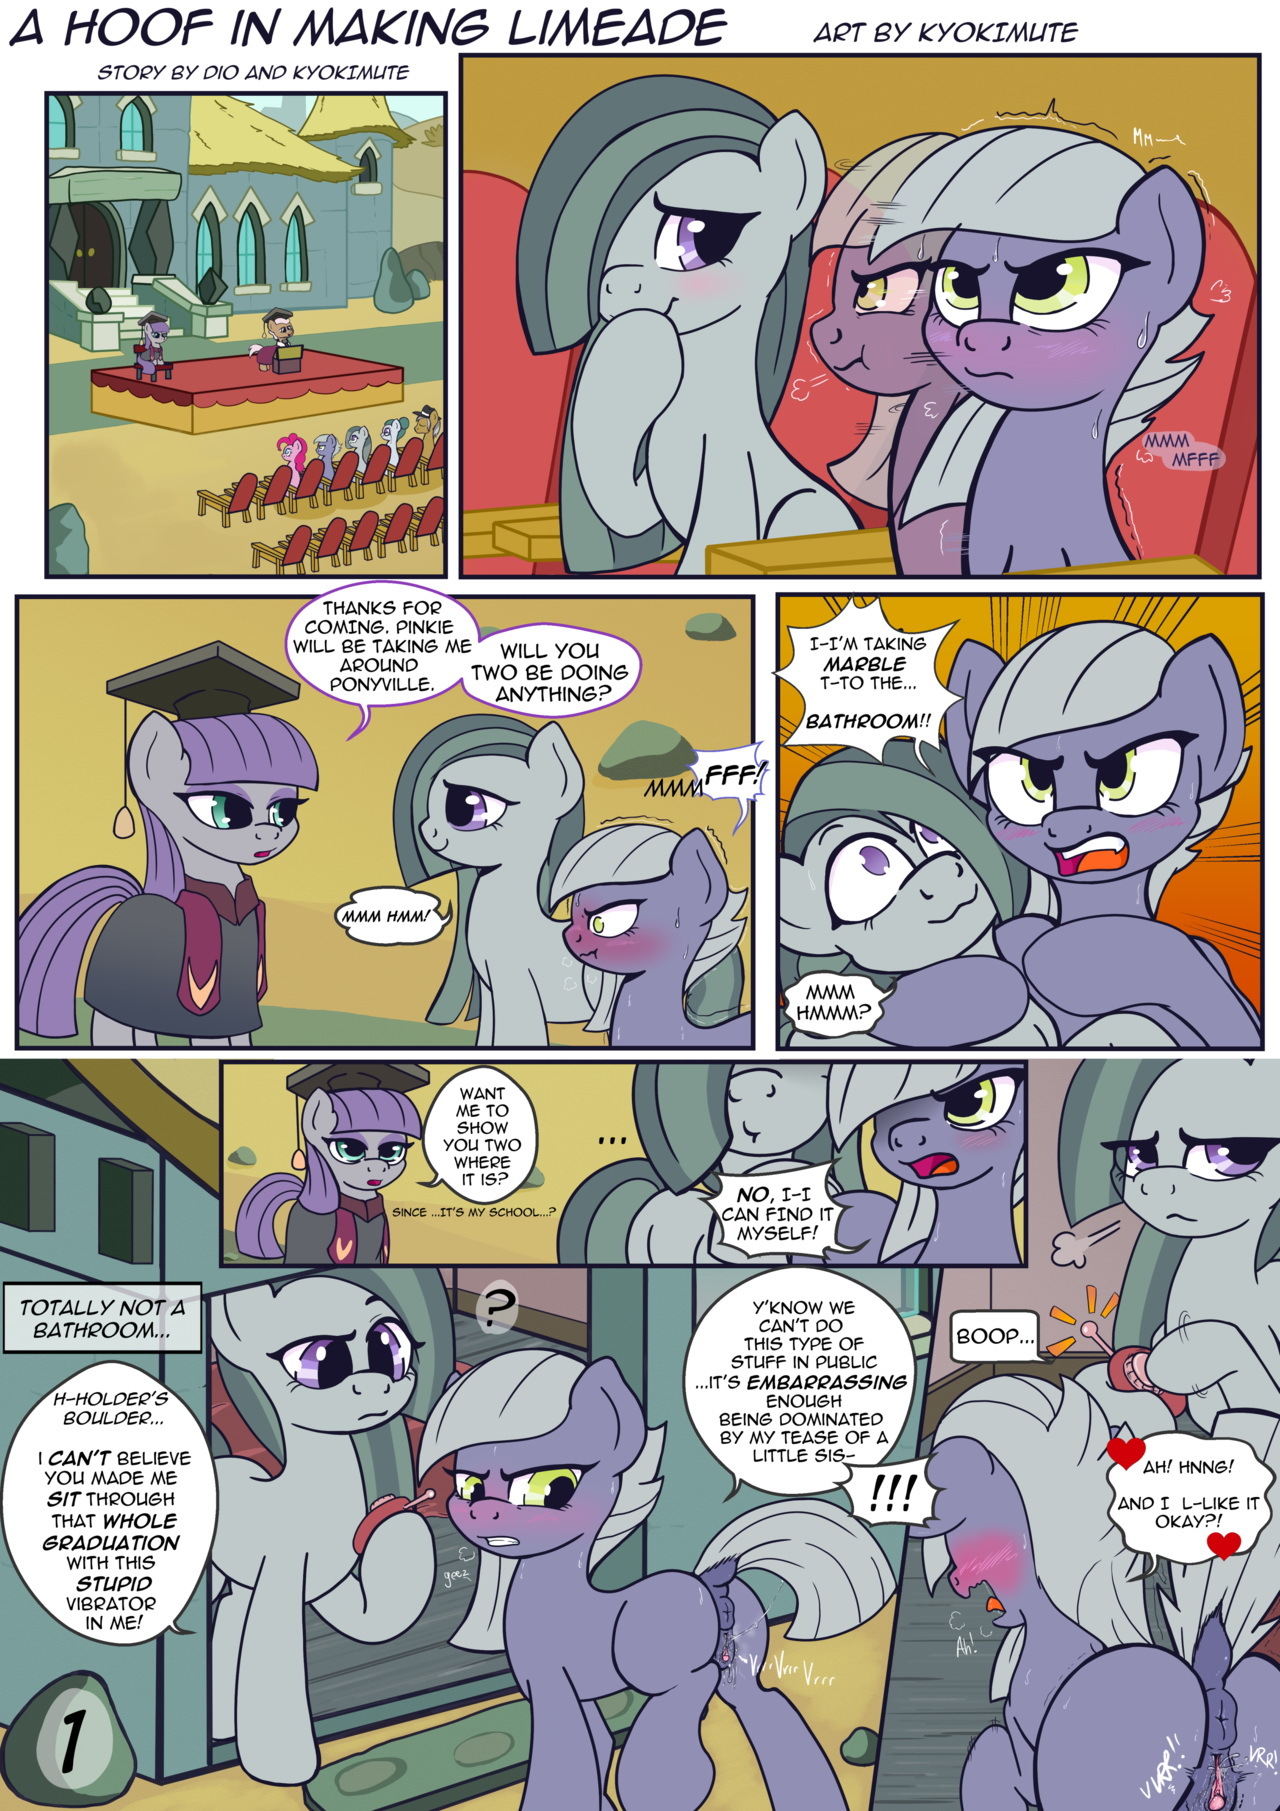 A Hoof in Making Limeade - Page 1